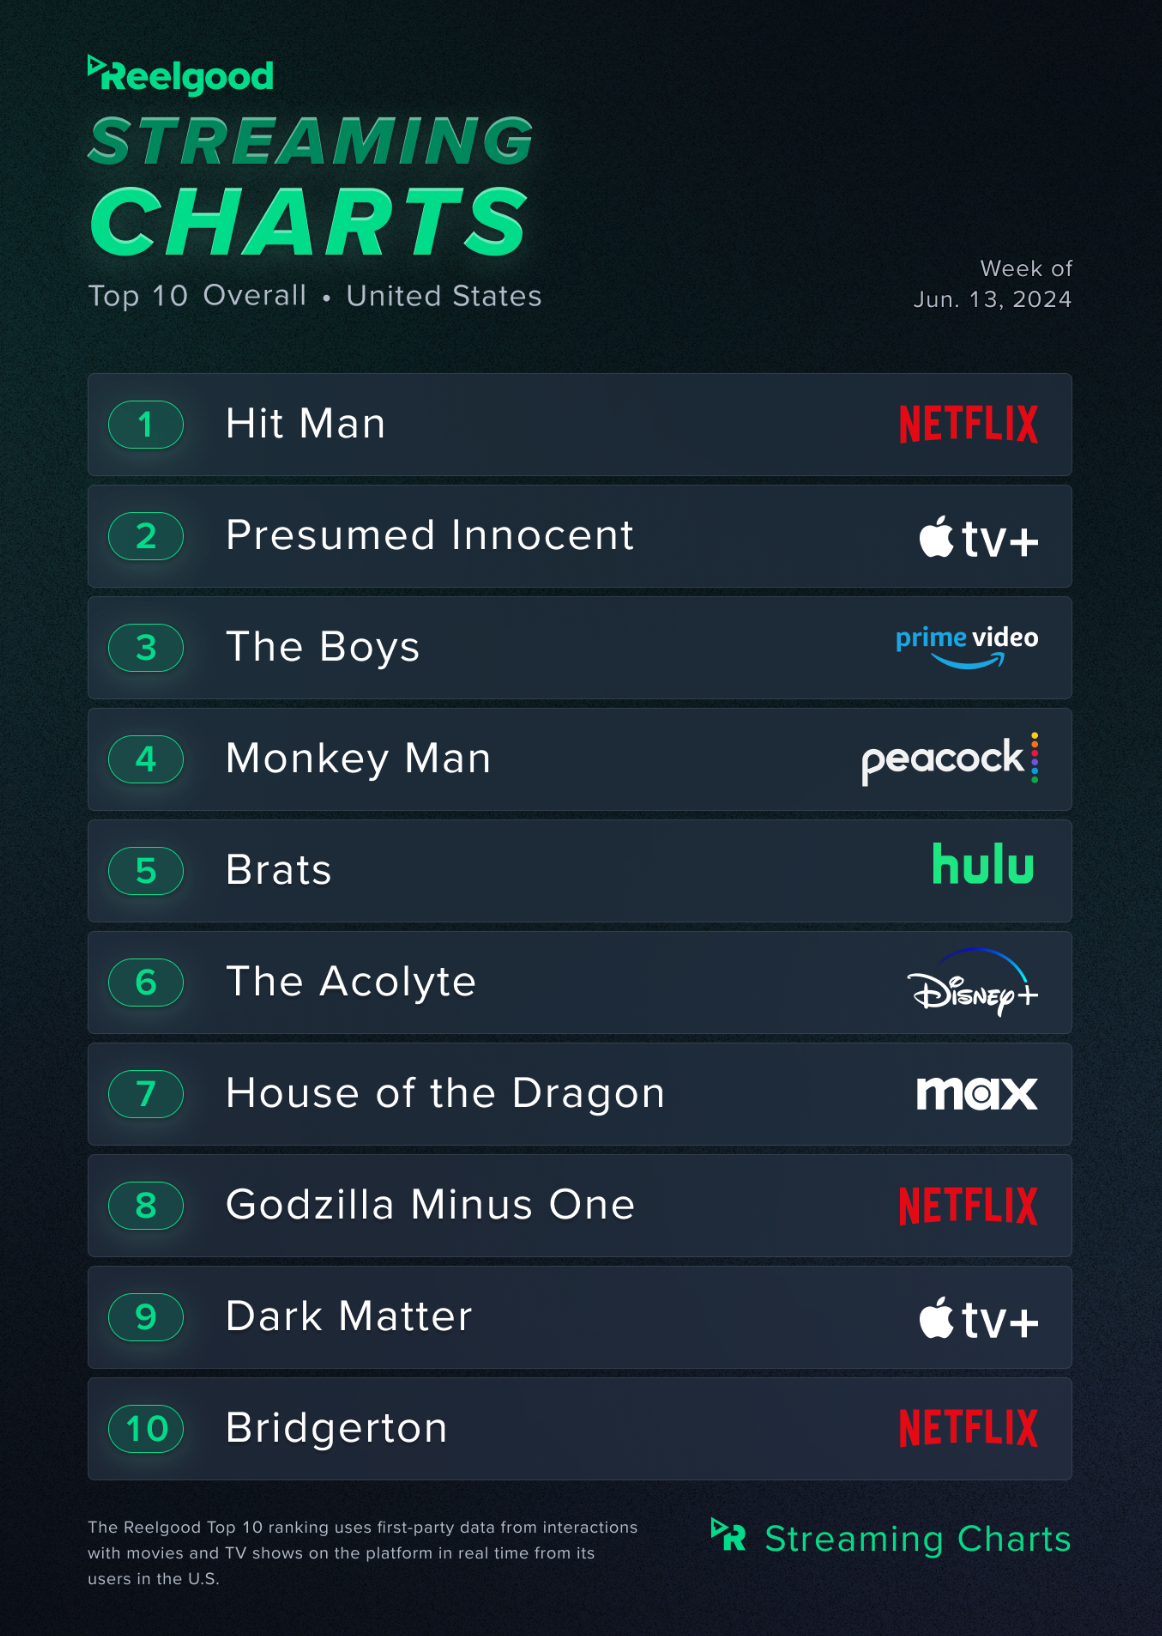 Reelgood Top 10 streaming chart for the week of June 13 – 19